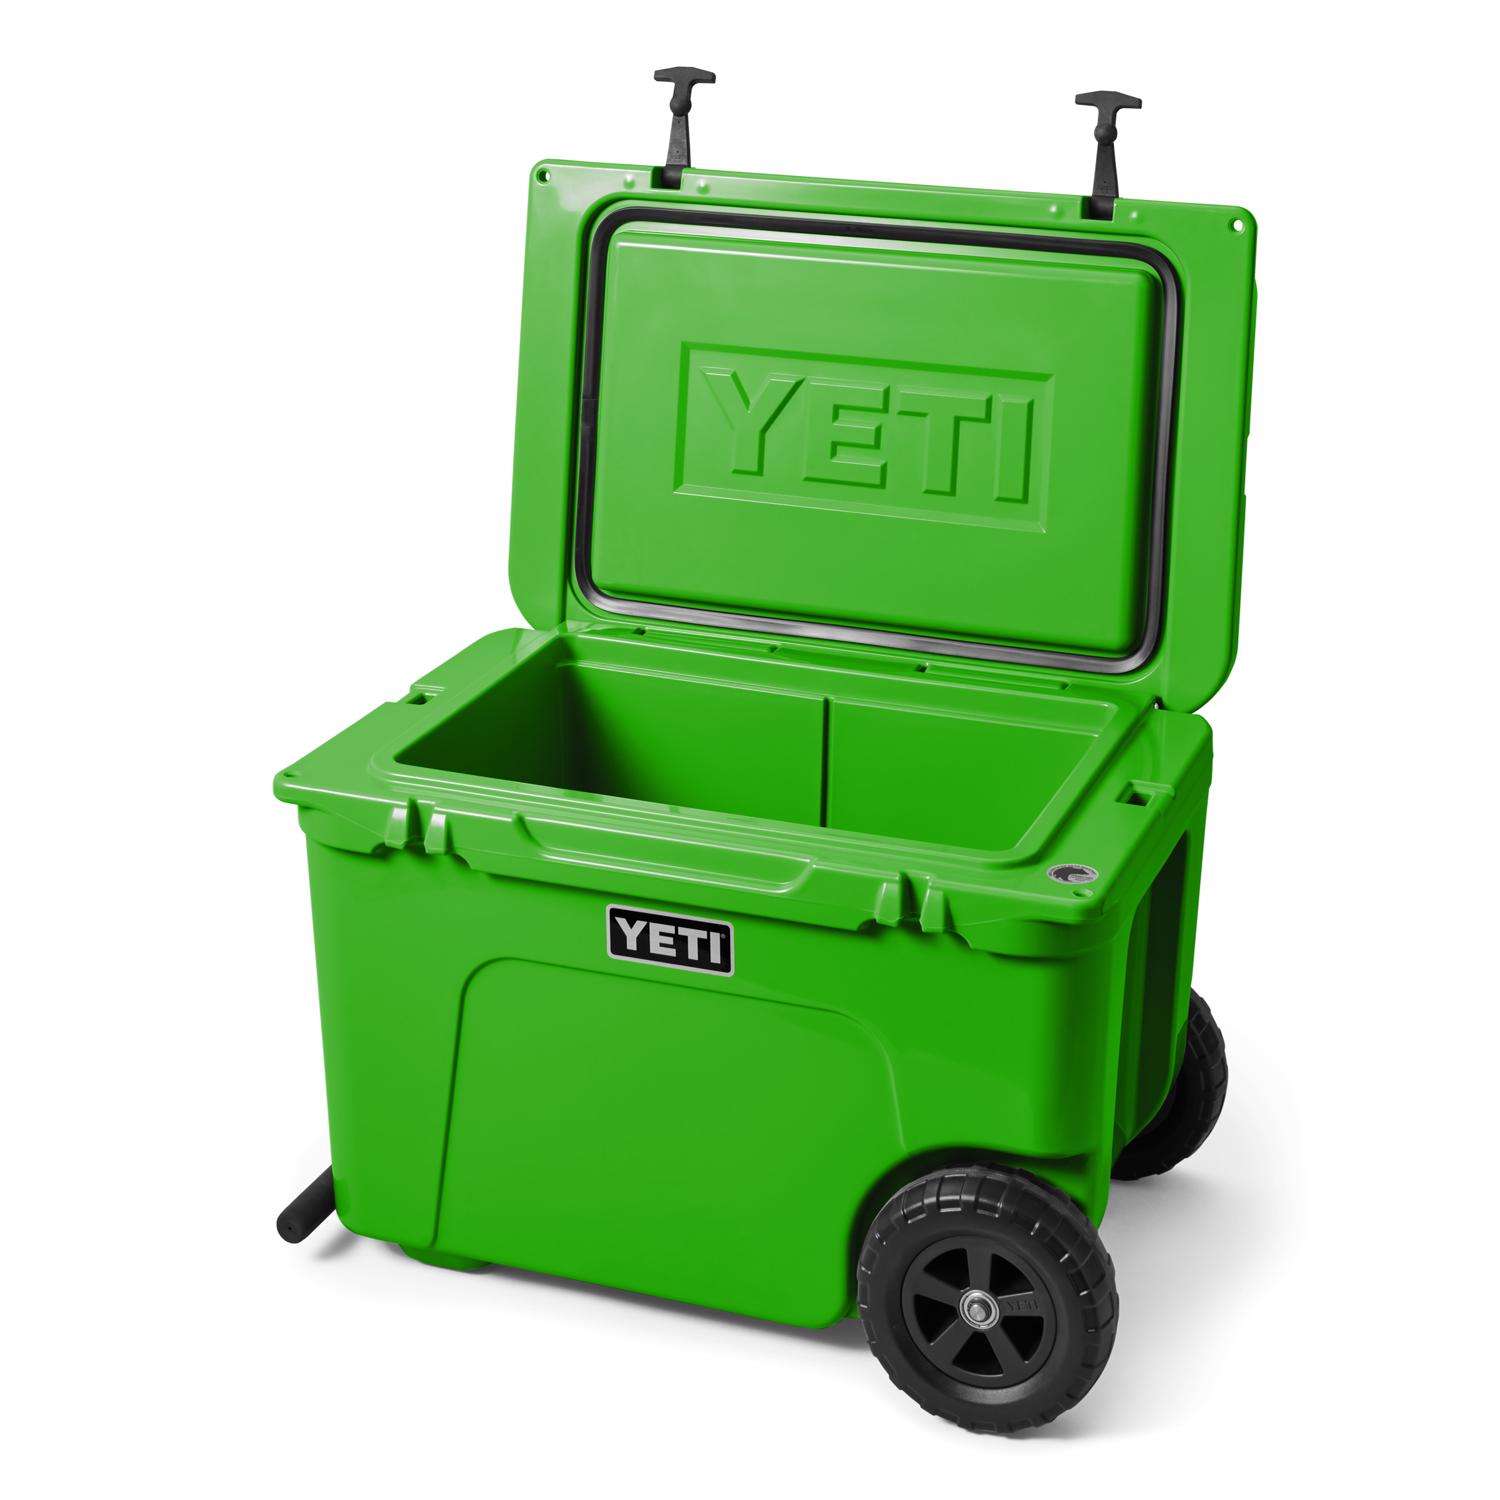 YETI HAUL WHEELED SEAFOAM COOLER - RARE OUT OF PRODUCTION COLOR - BEST  OFFER